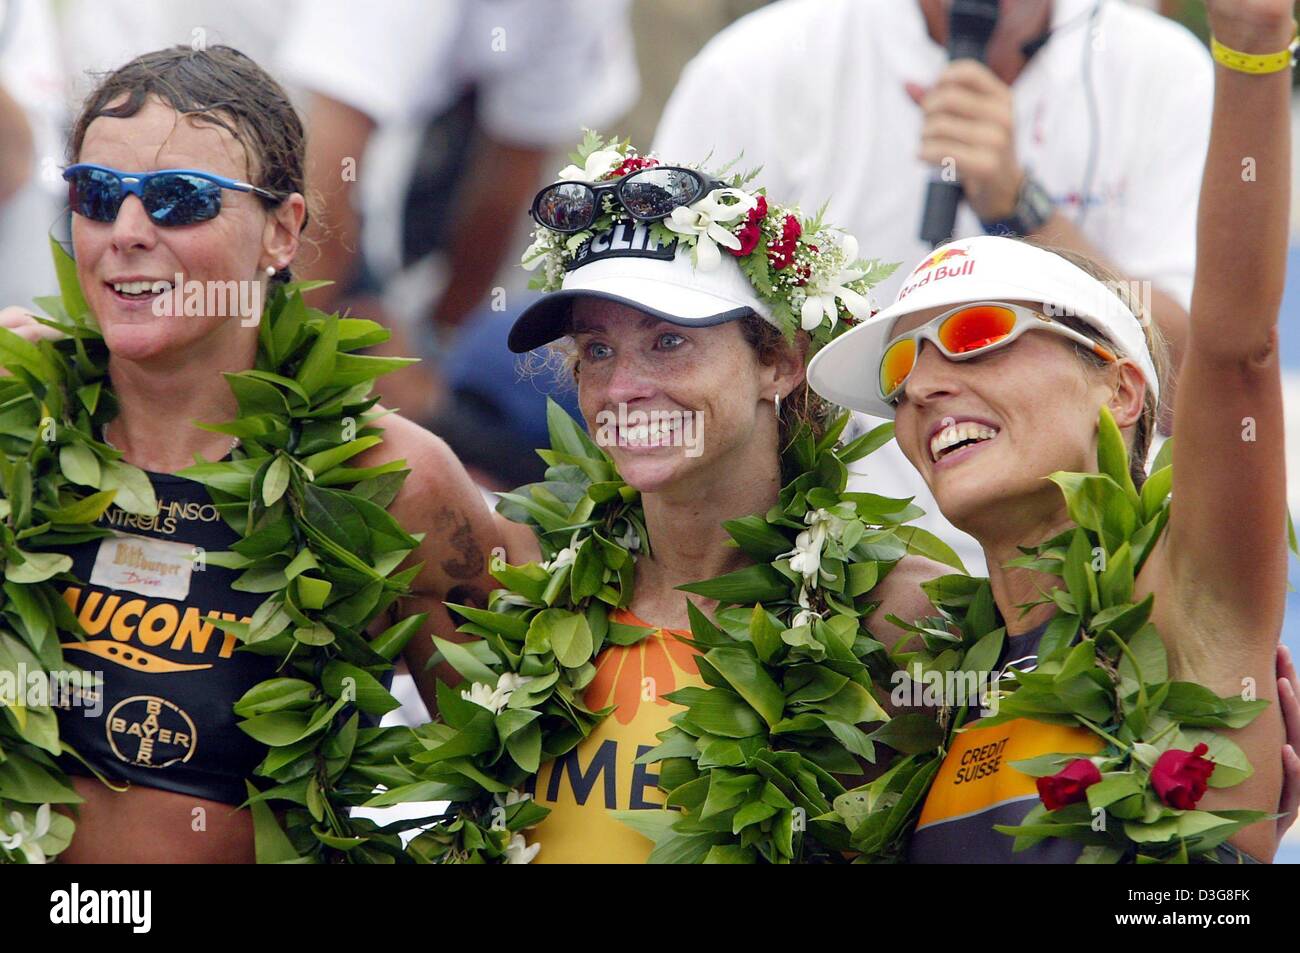 (dpa) - The winners of the women's Iron Man competition, first-placed Lori Bowden from Canada (C), second-placed Natascha Badmann (R) from Switzerland and third-placed German Nina Kraft (L), pose on the podium in Kailua-Kona, Hawaii, 18 October 2003. Bowden won the women's event clocking 9:11:55 hours. The event included 3.8 km swimming, 180 km cycling and a marathon course. Stock Photo